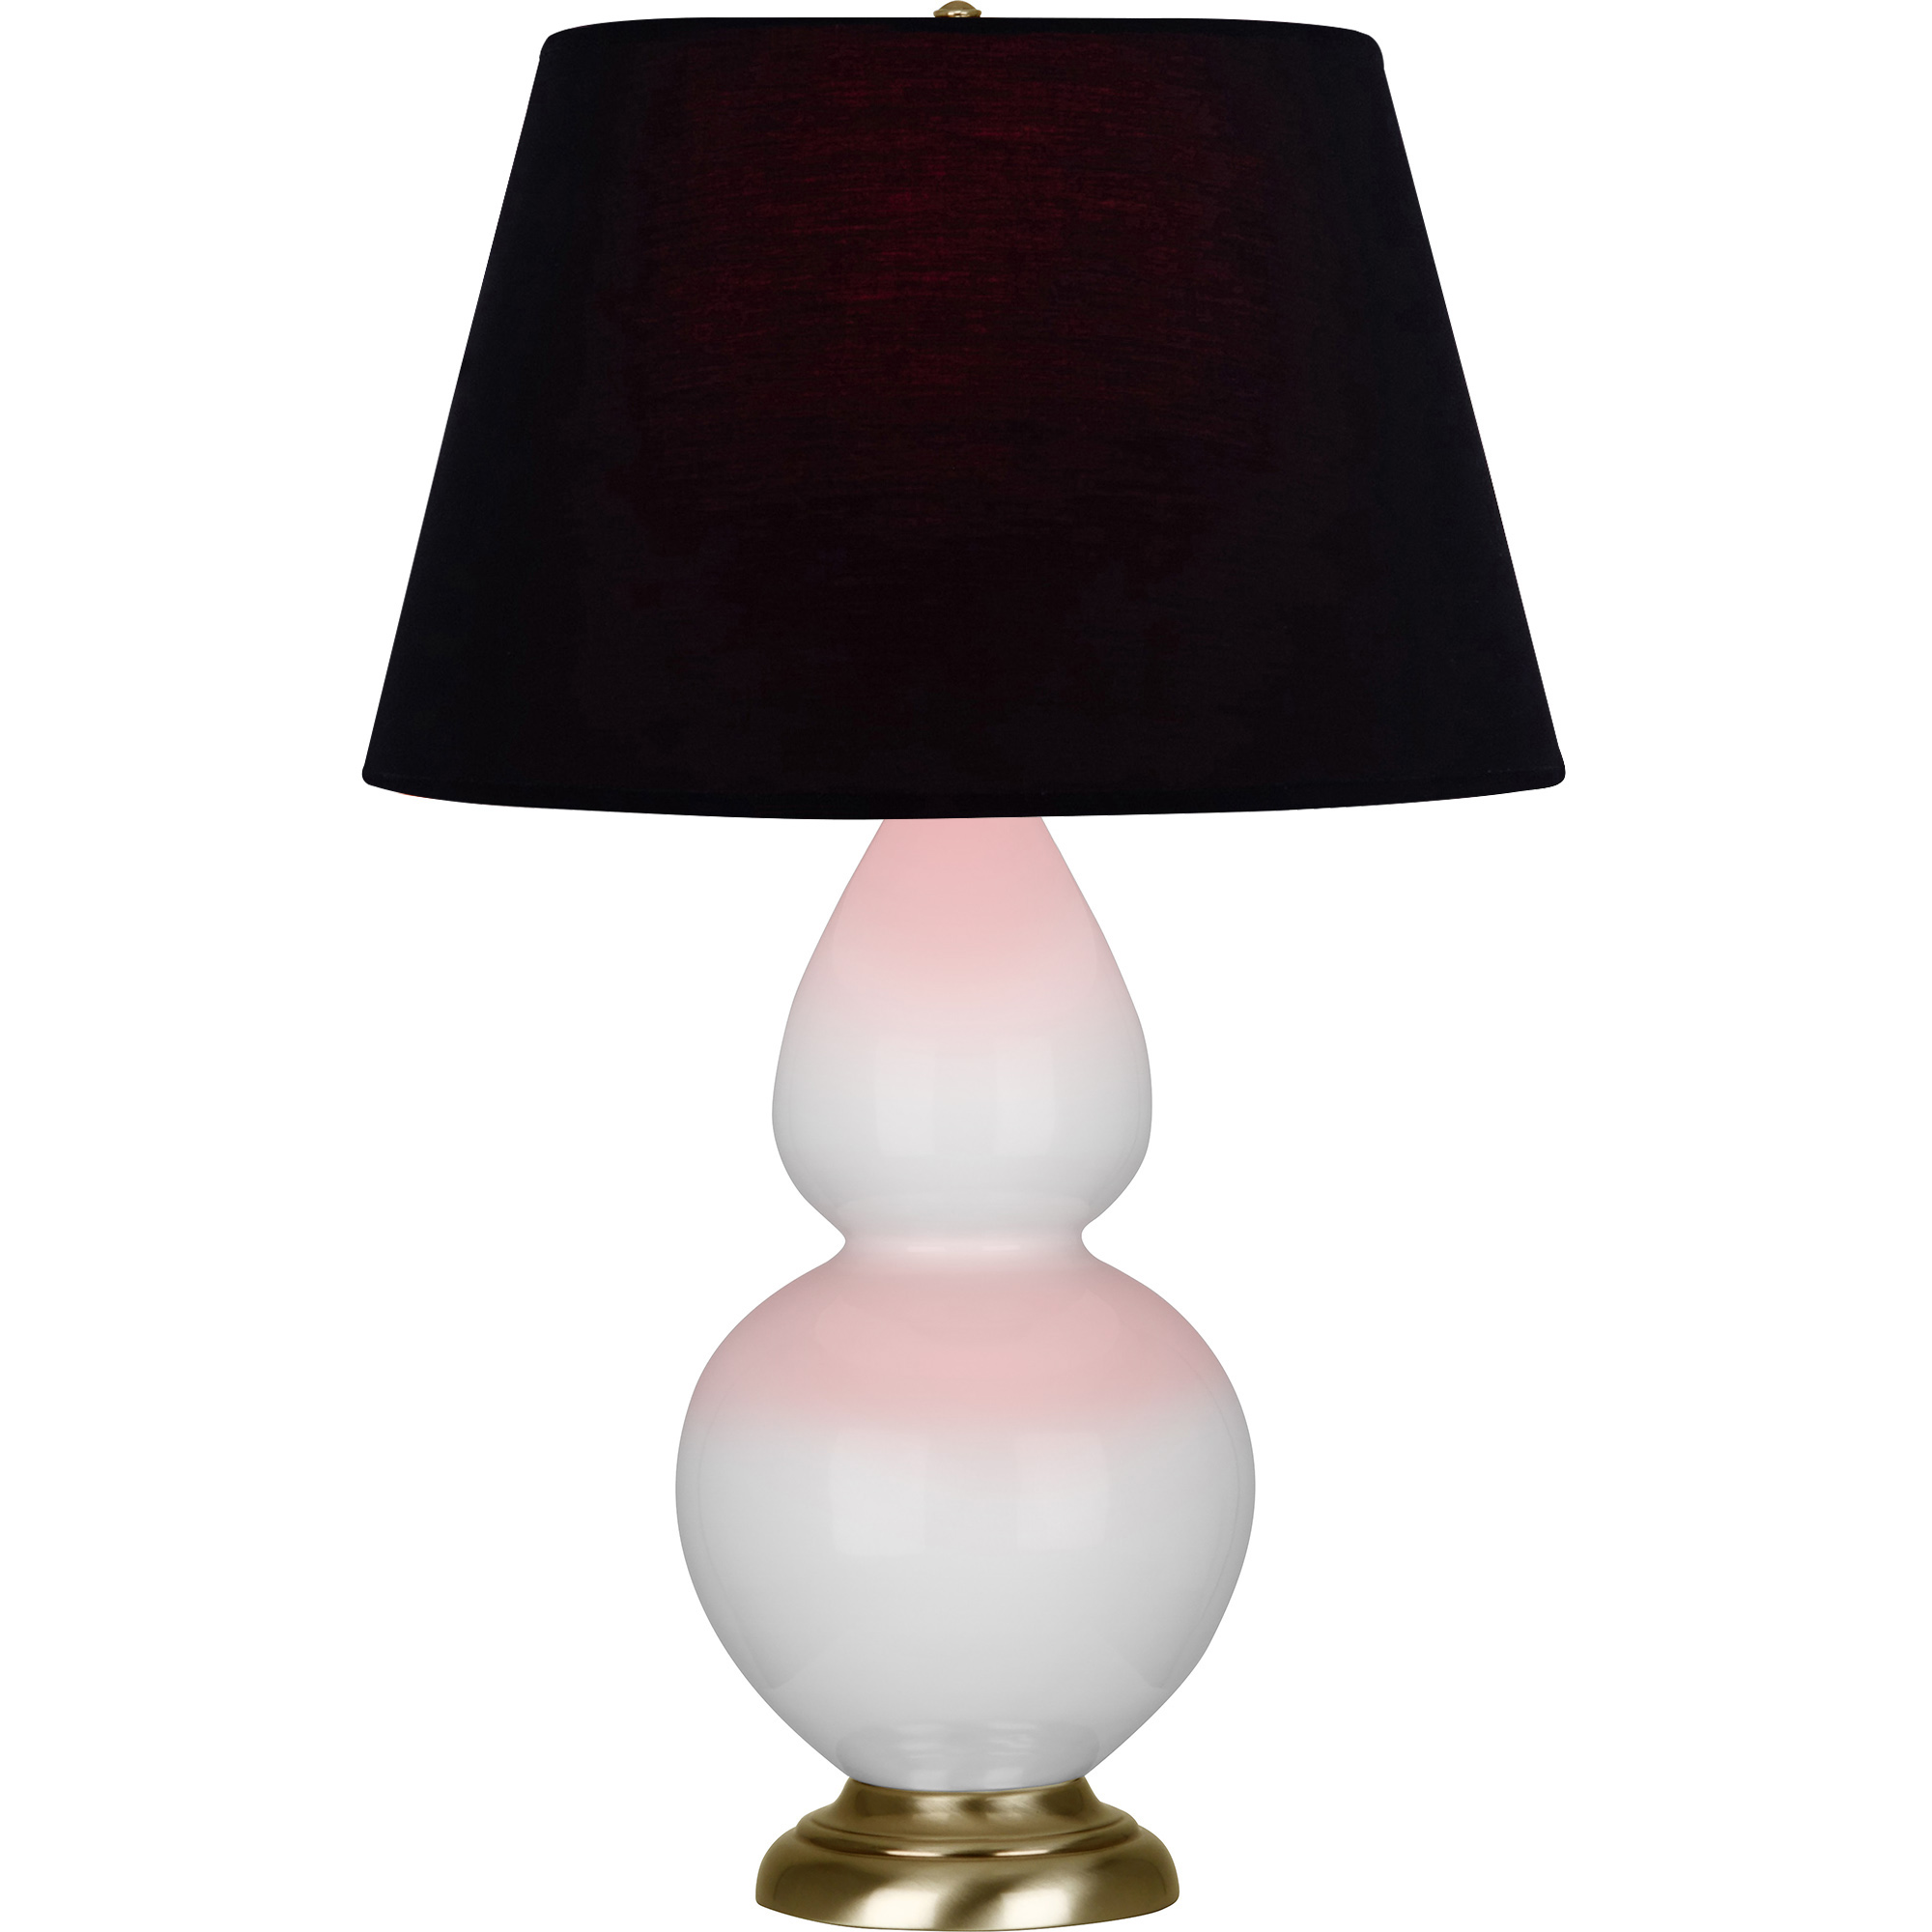 Double Gourd Table Lamp Style #DY20K